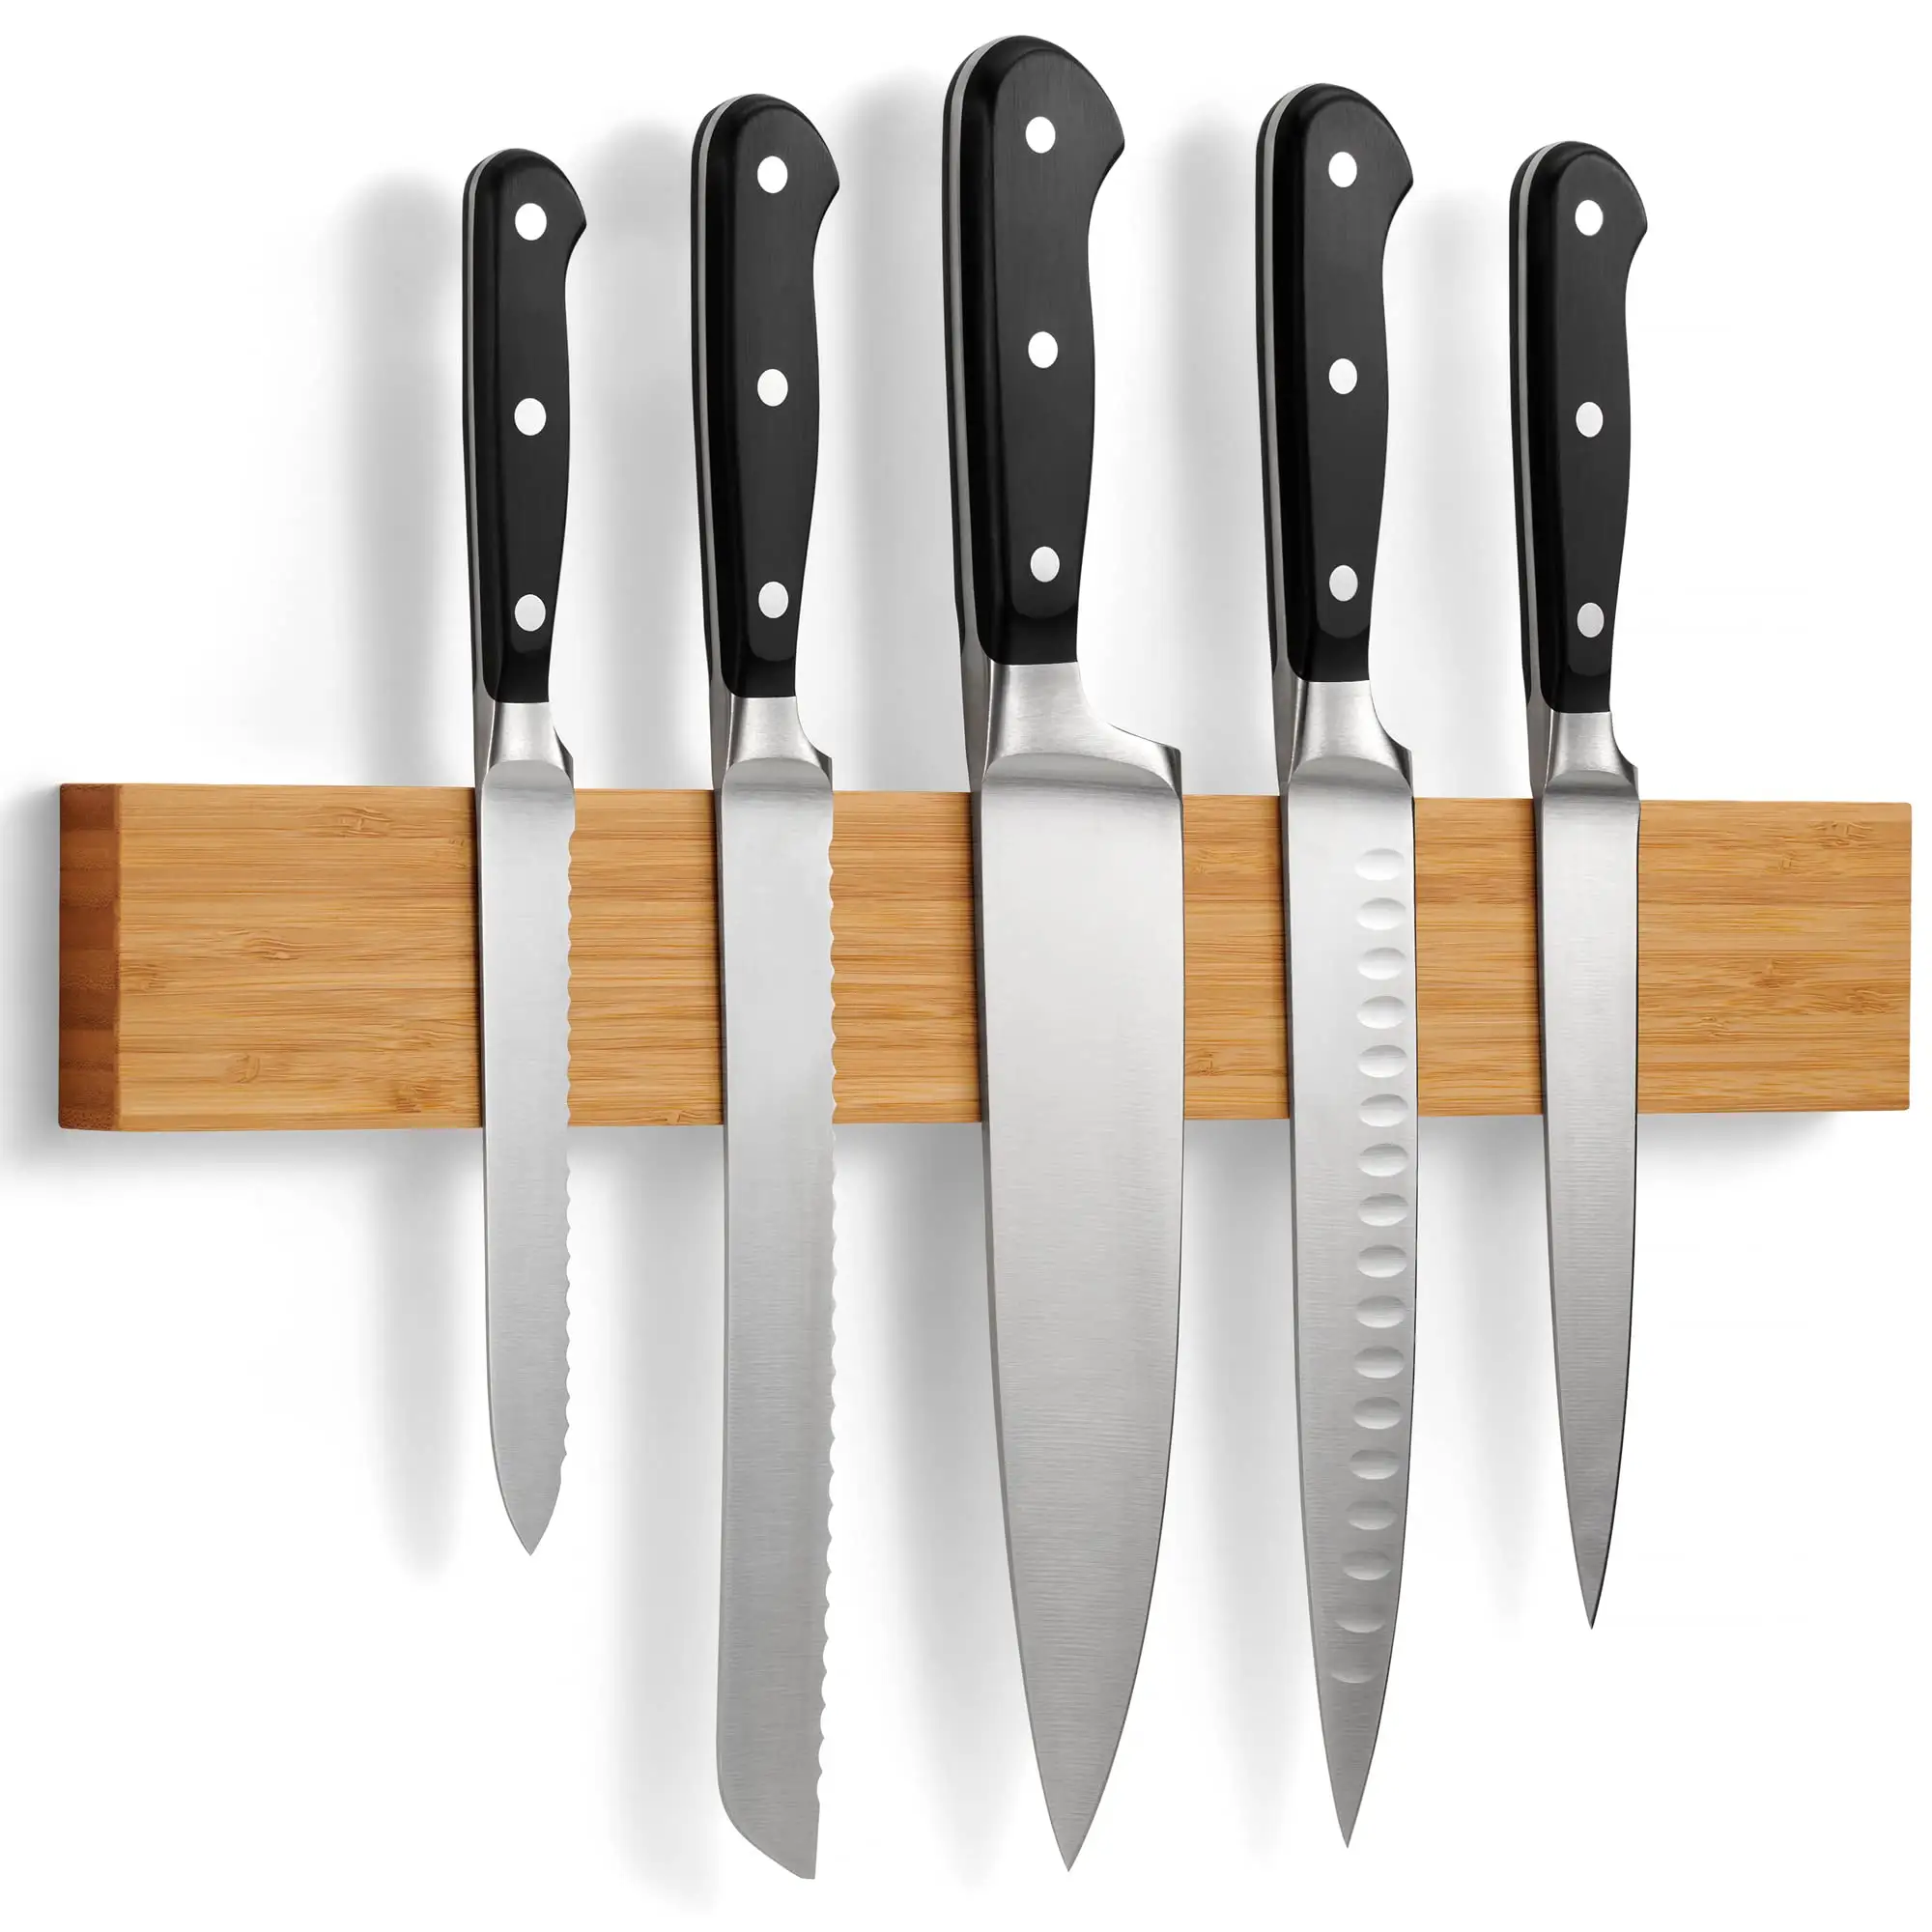 Wooden Magnetic Knife Holder for Wall with Extra Strong Magnet Knife Magnetic Strip in Bamboo For Utensils and Tools